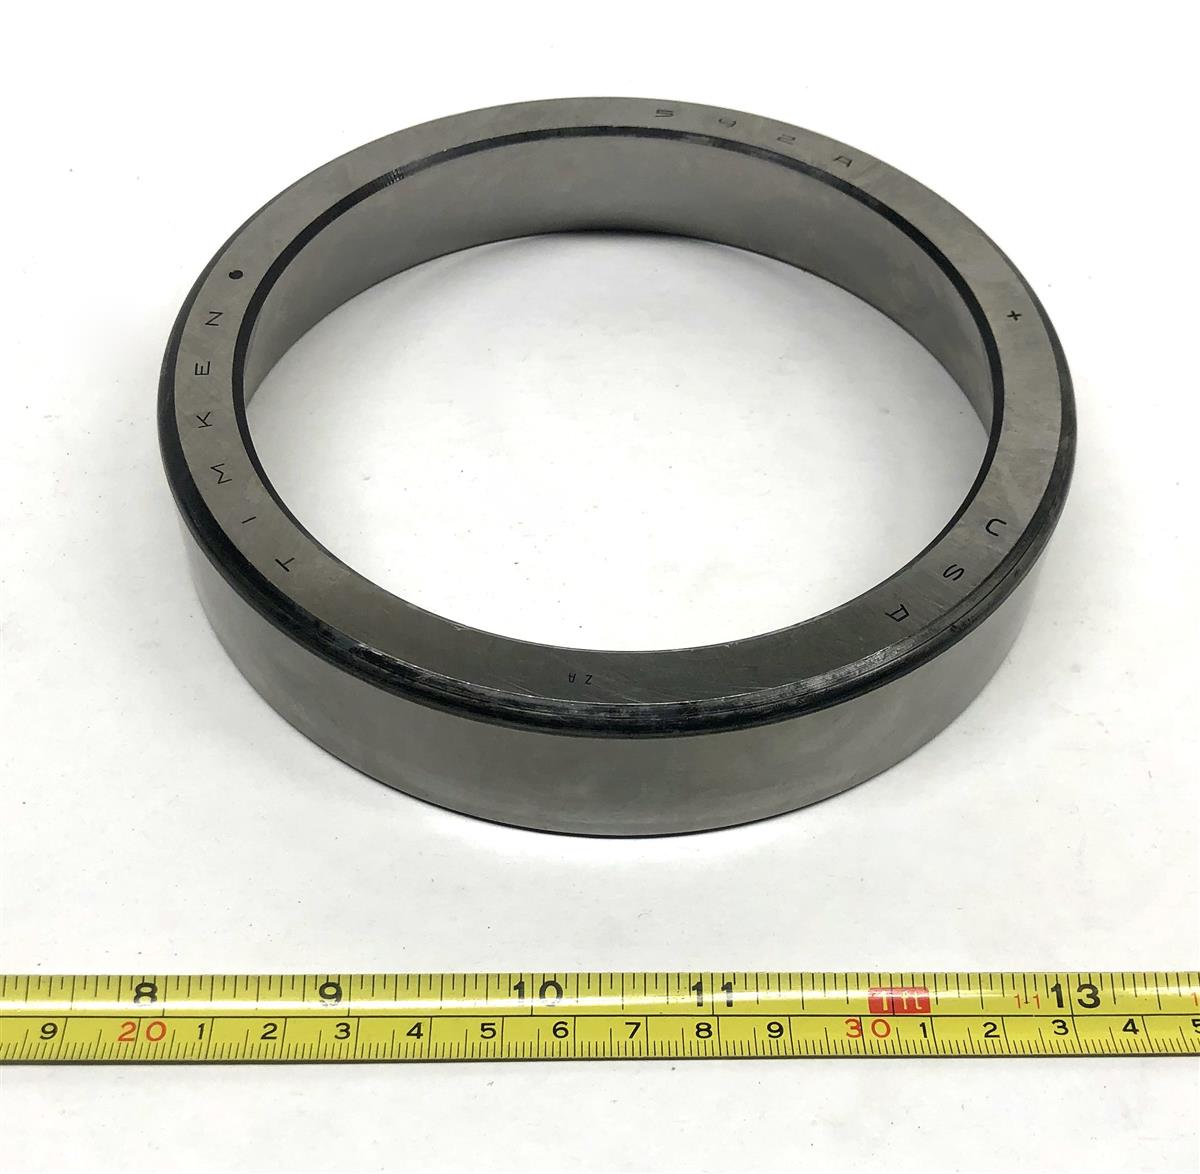 COM-5450 | COM-5450  Common Tapered Roller Bearing Cup Race (2).JPG